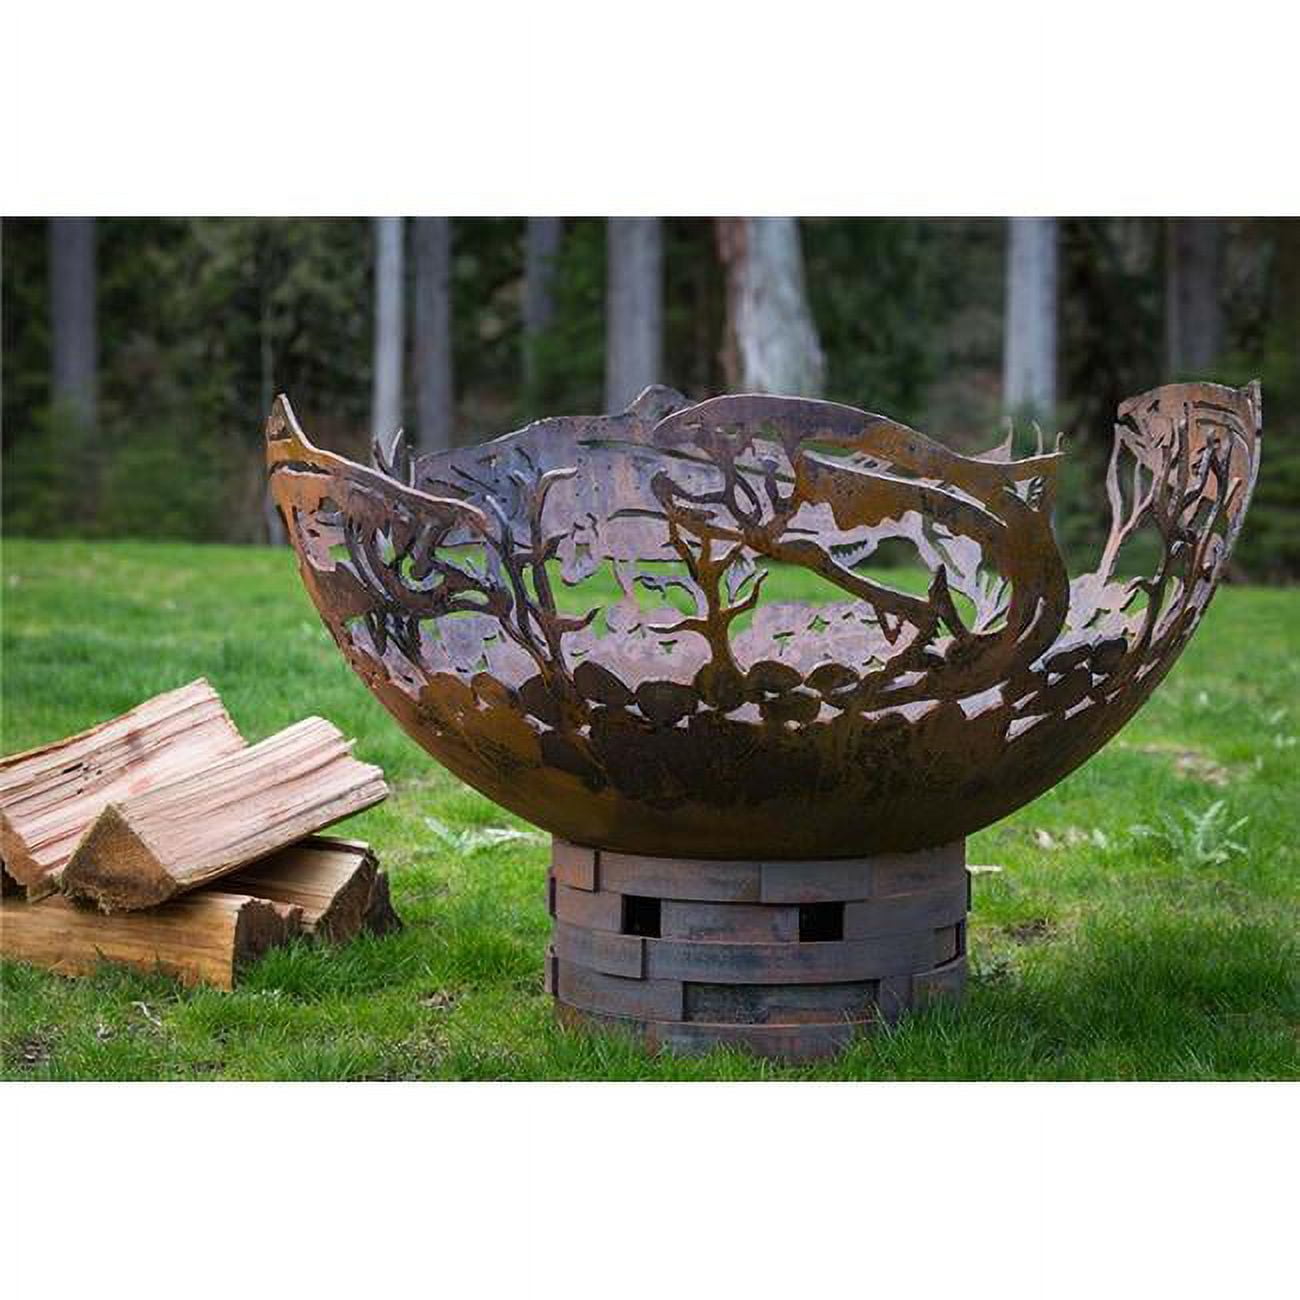 20005-ngml Salmon Fire Pit - Natural Gas With Match Lit